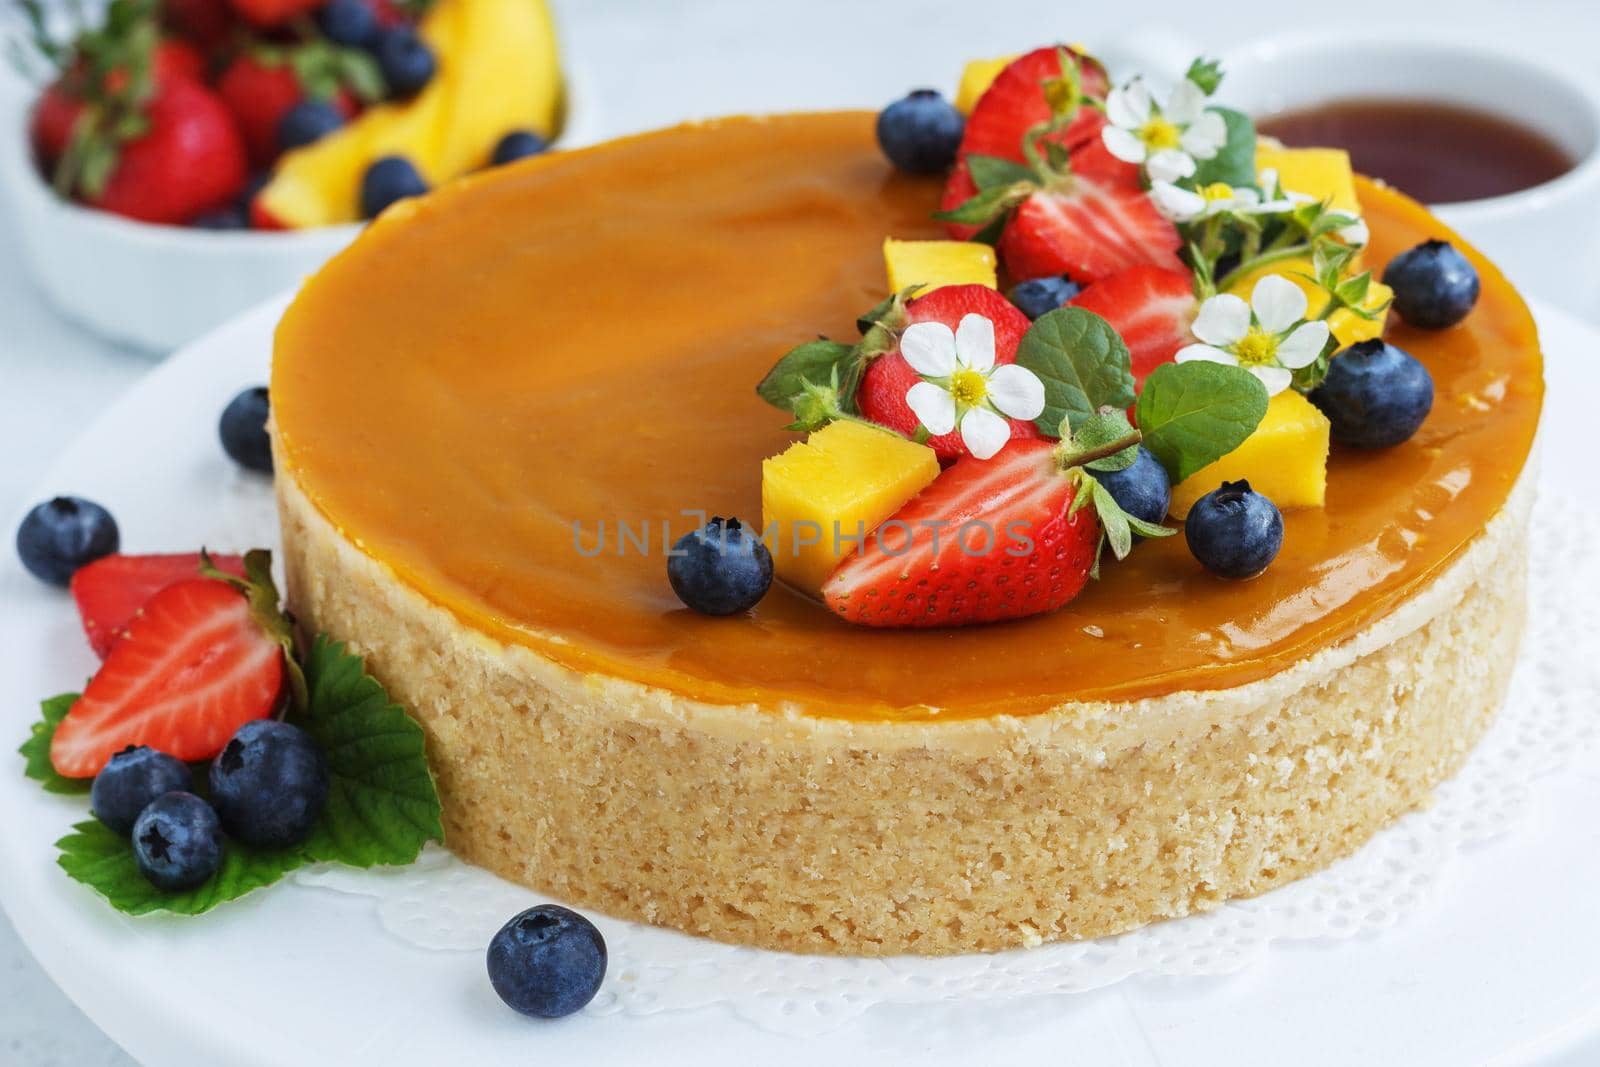 Mango cheesecake decorated with berries, mango slices and flowers on a stand. close-up